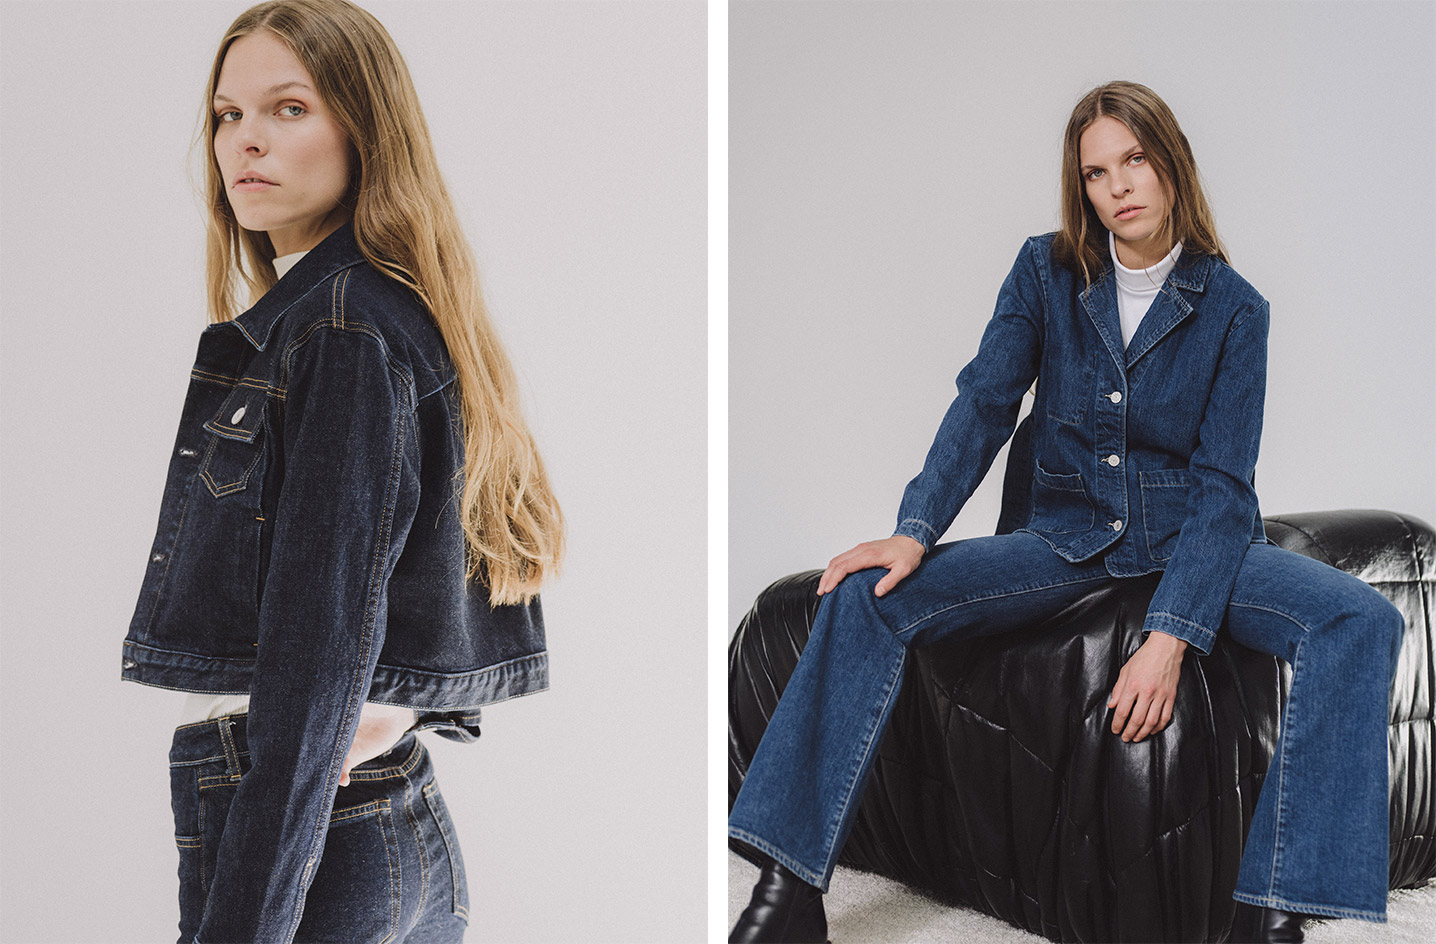 TRAVE Denim – New Jeans Brand For 2019 - THE JEANS BLOG